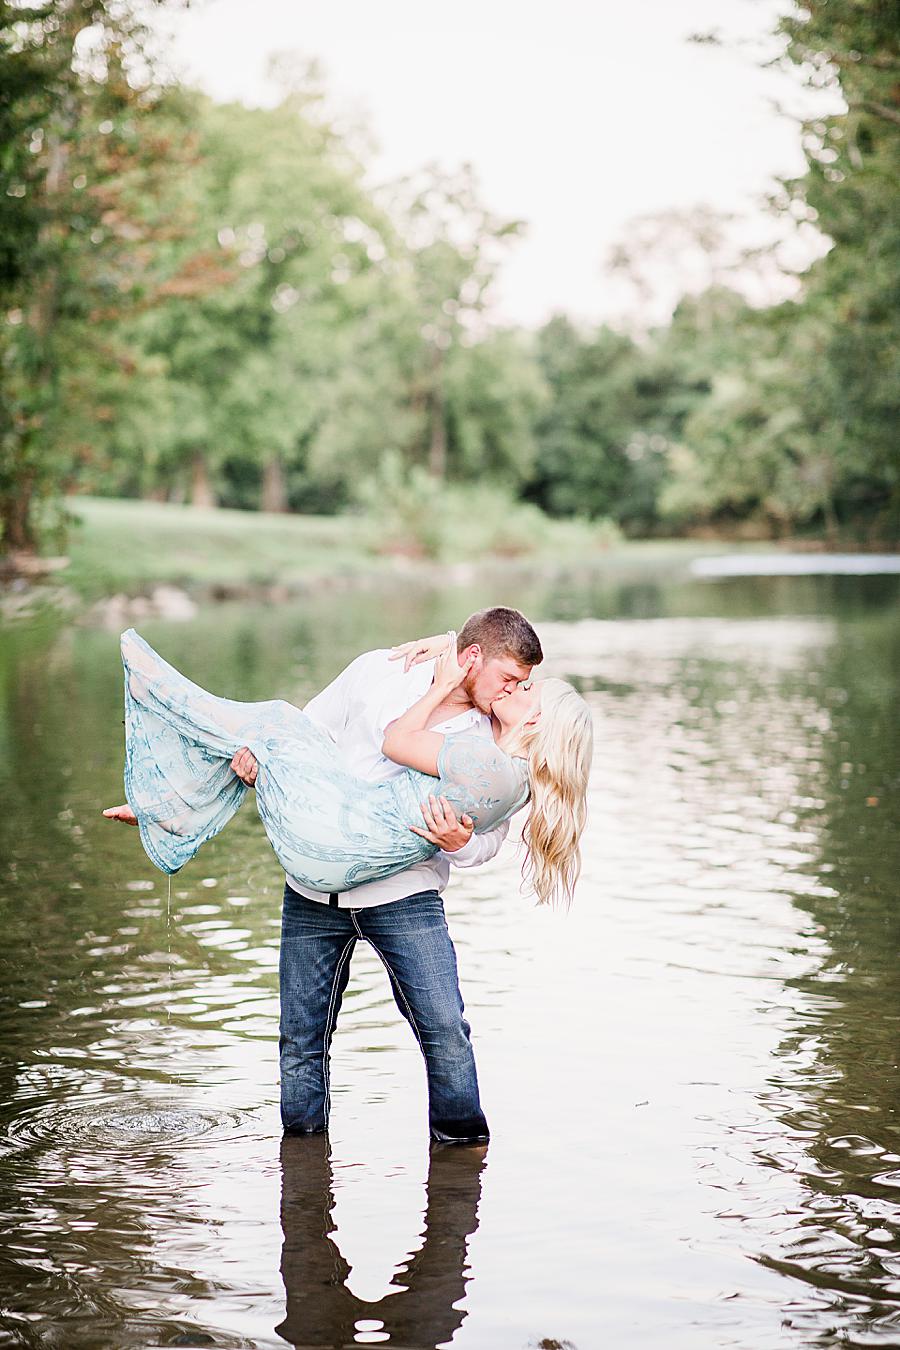 Kissing in the river by Knoxville Wedding Photographer, Amanda May Photos.